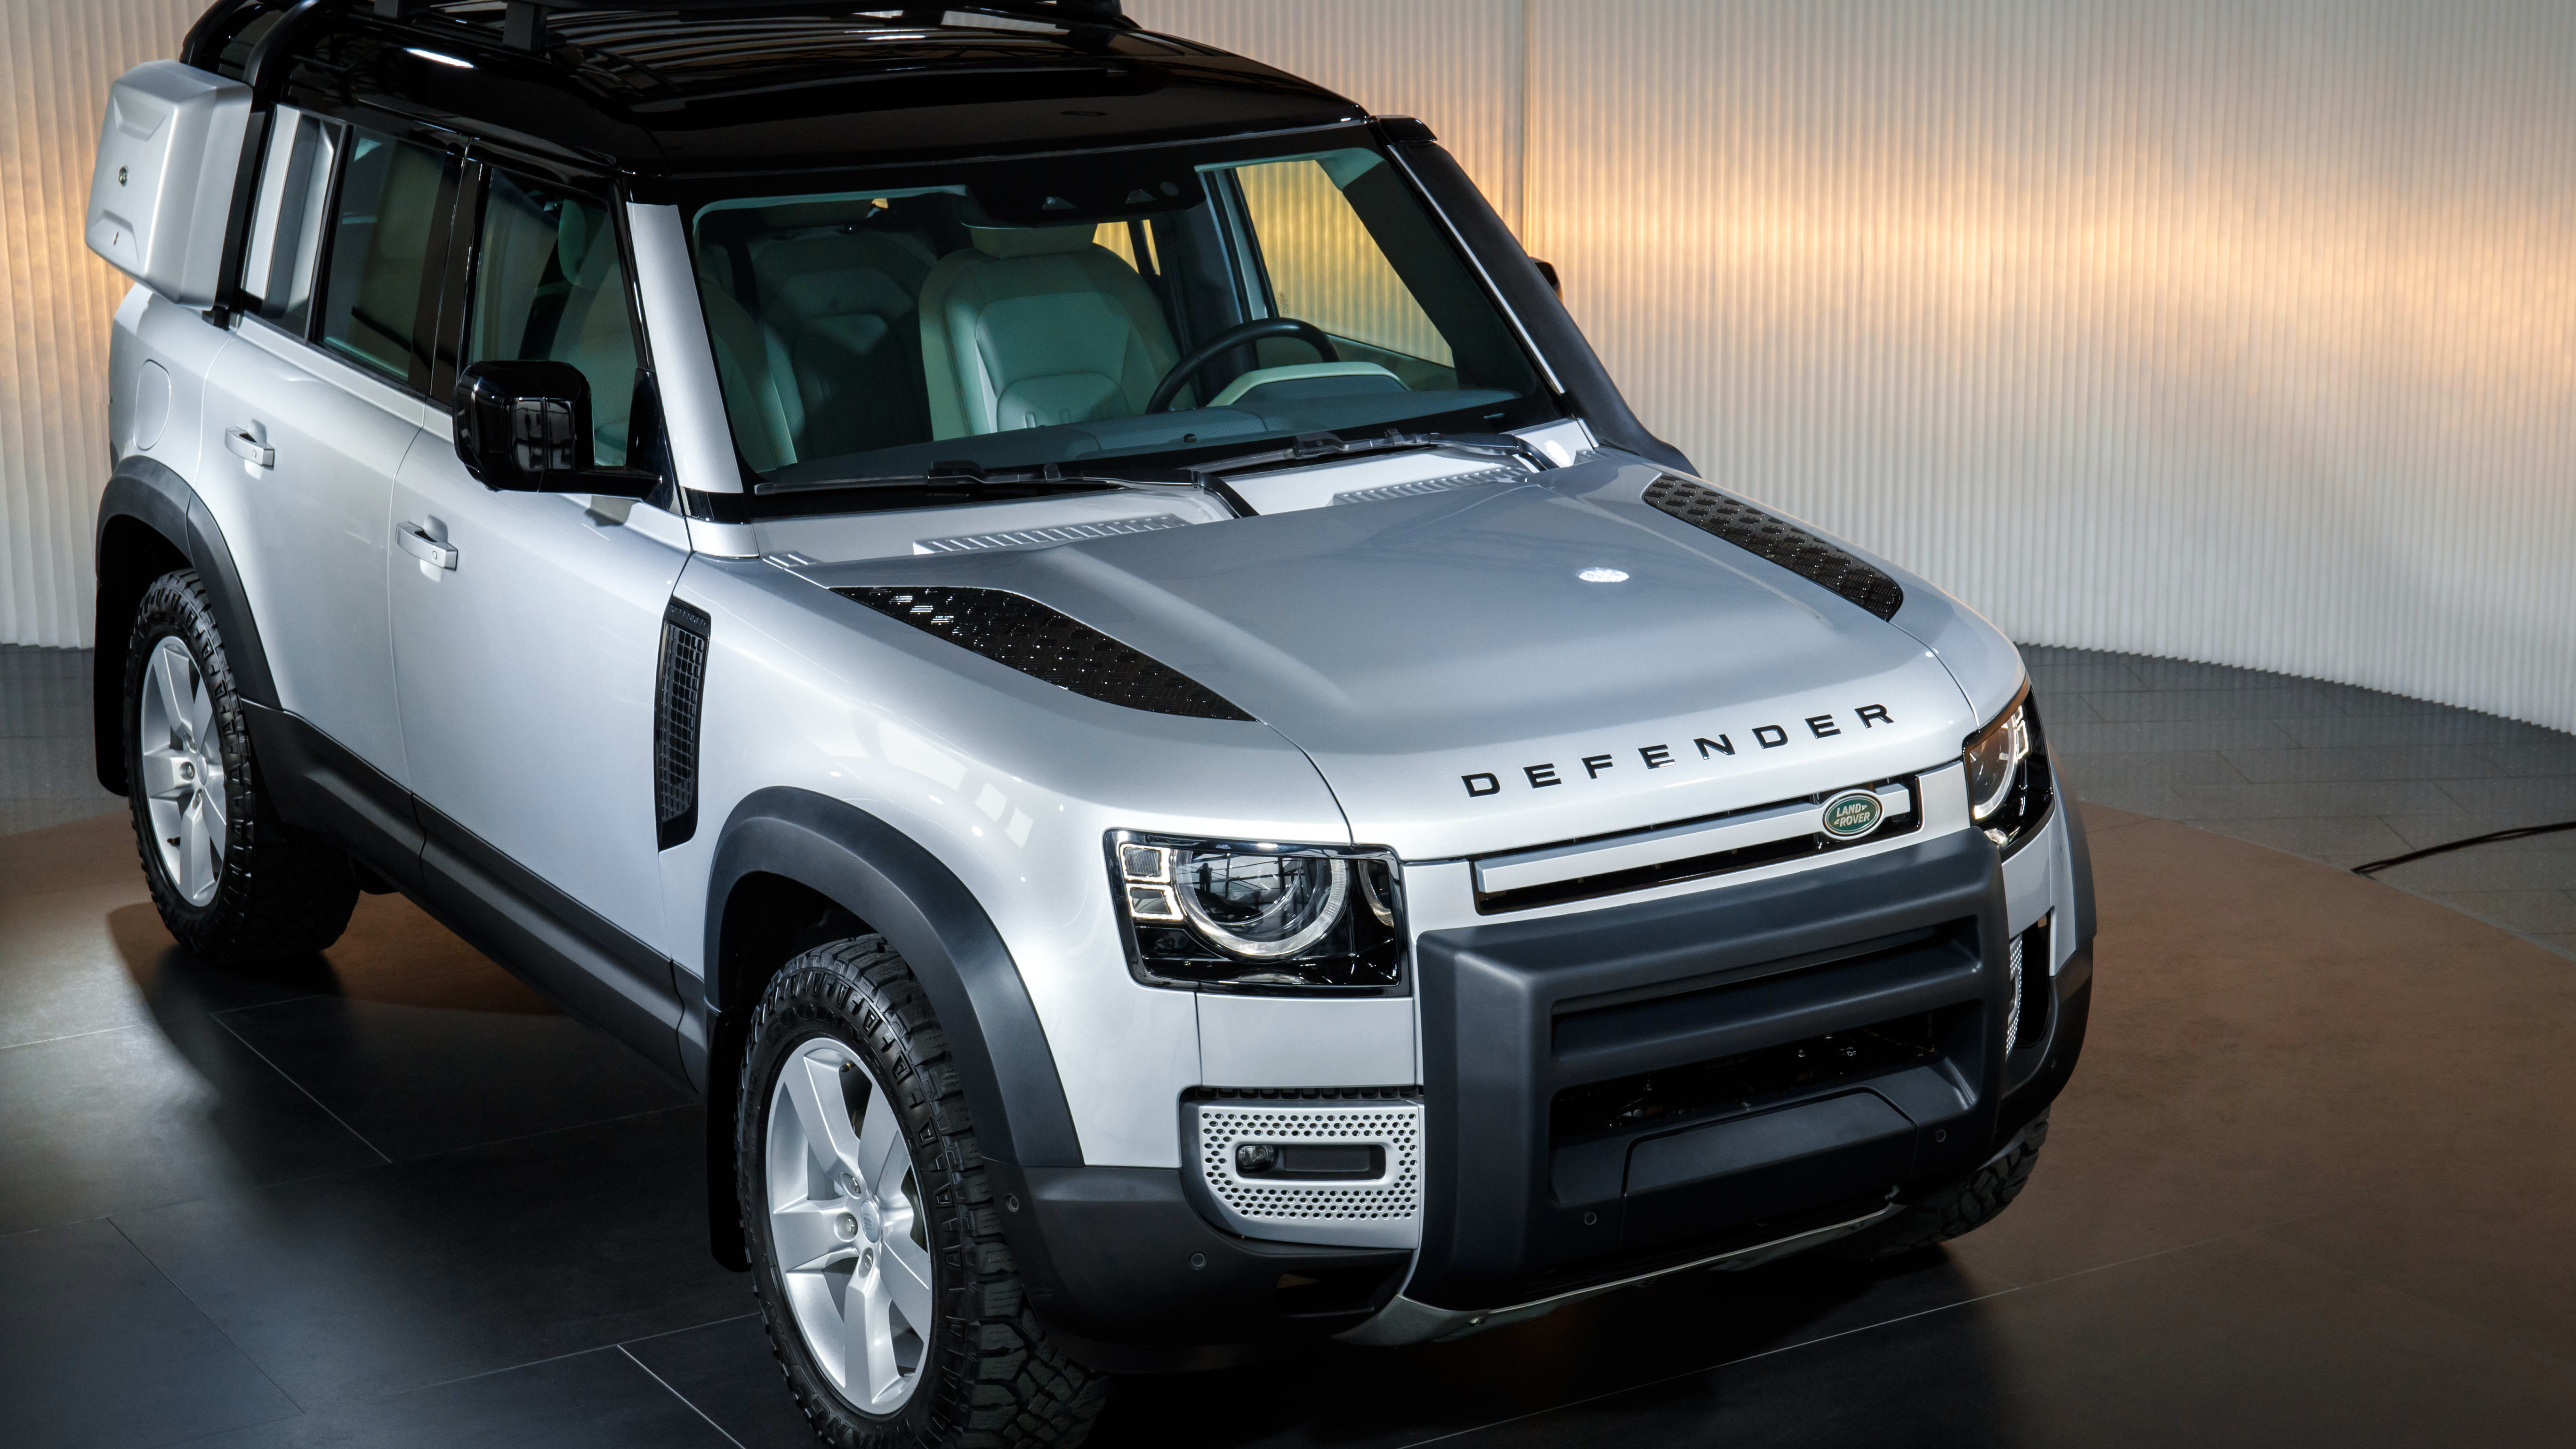 2020 Land Rover Defender 110 pricing and specs | CarAdvice